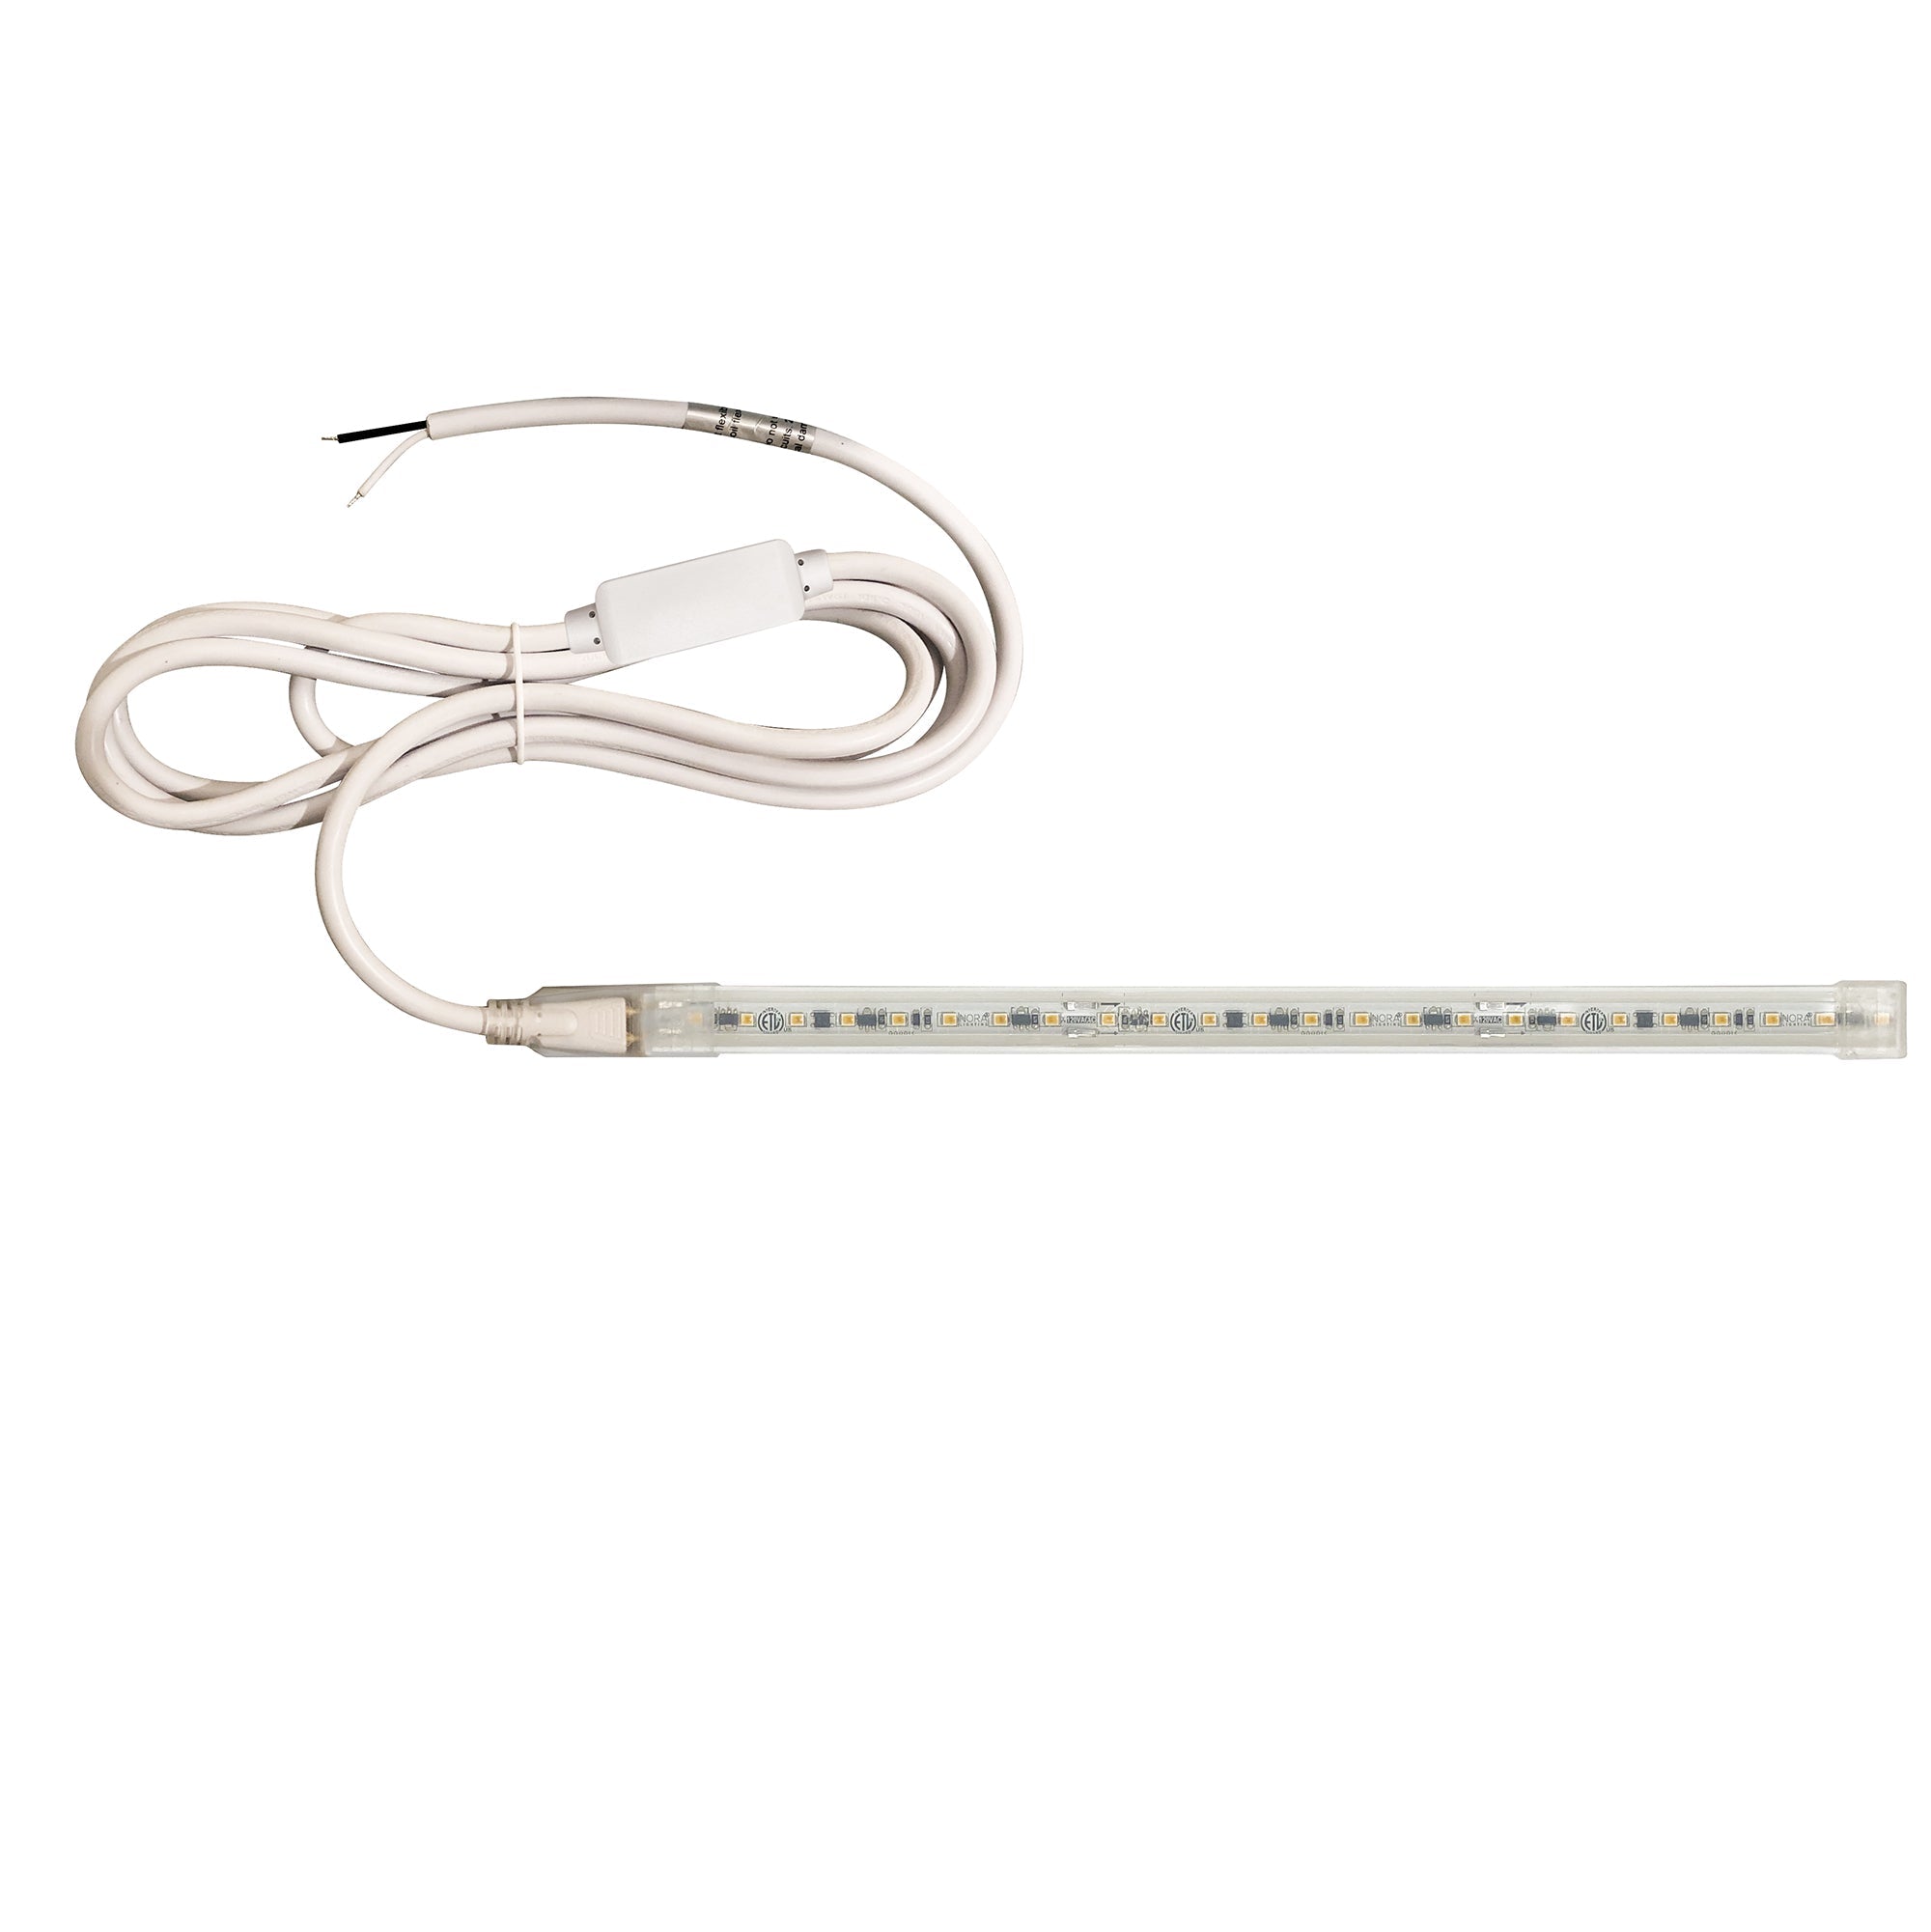 Nora Lighting NUTP13-W92-12-930/HWSP - Accent / Undercabinet - Custom Cut 92-ft 120V Continuous LED Tape Light, 330lm / 3.6W per foot, 3000K, w/ Mounting Clips and 8' Hardwired Power Cord w/ Surge Protector